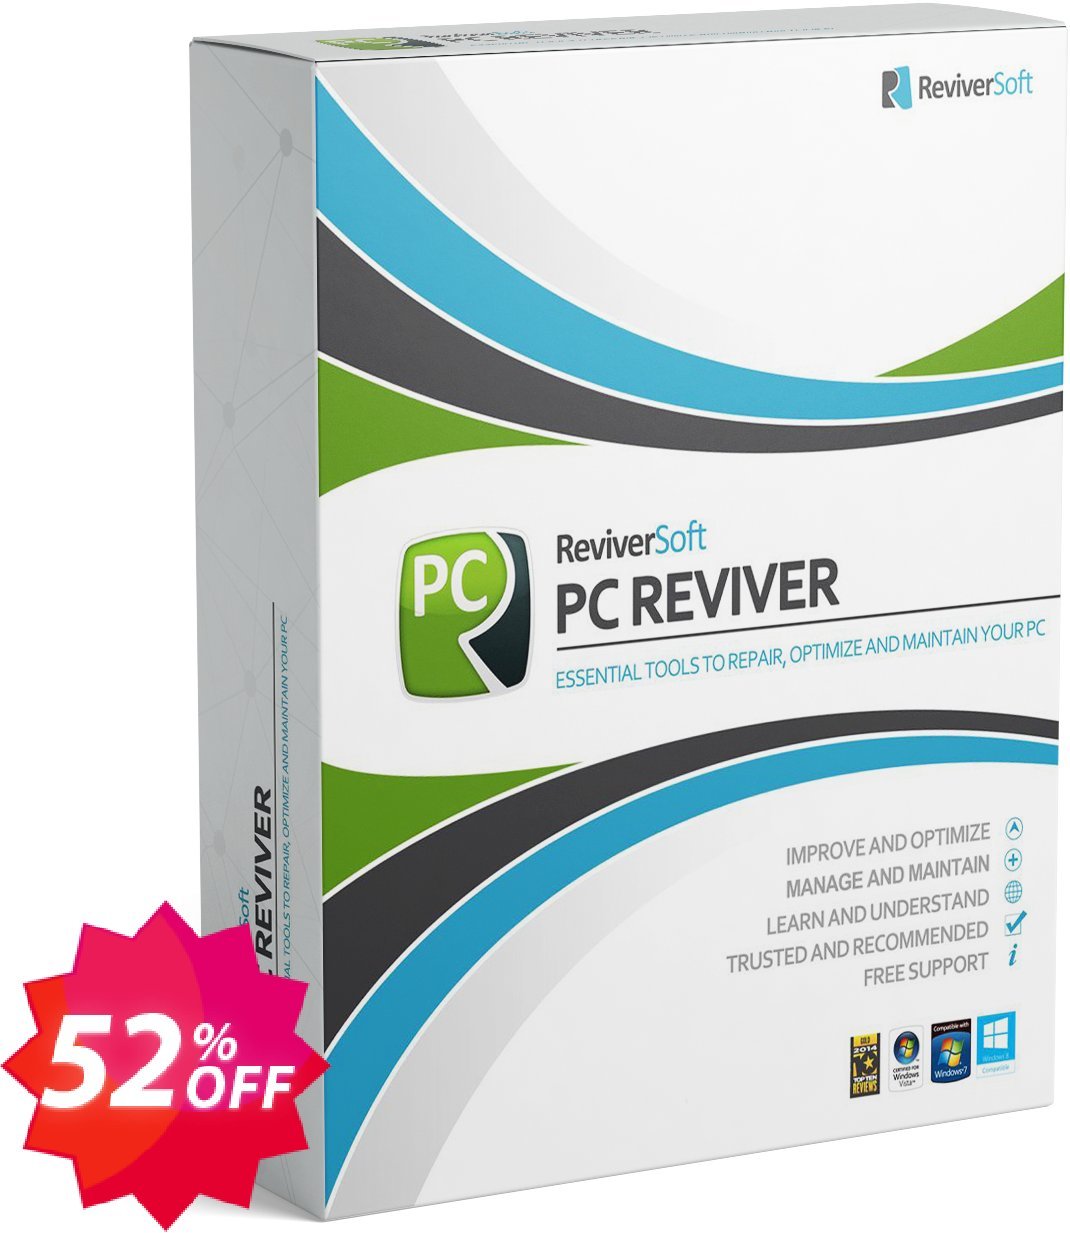 PC Reviver Coupon code 52% discount 